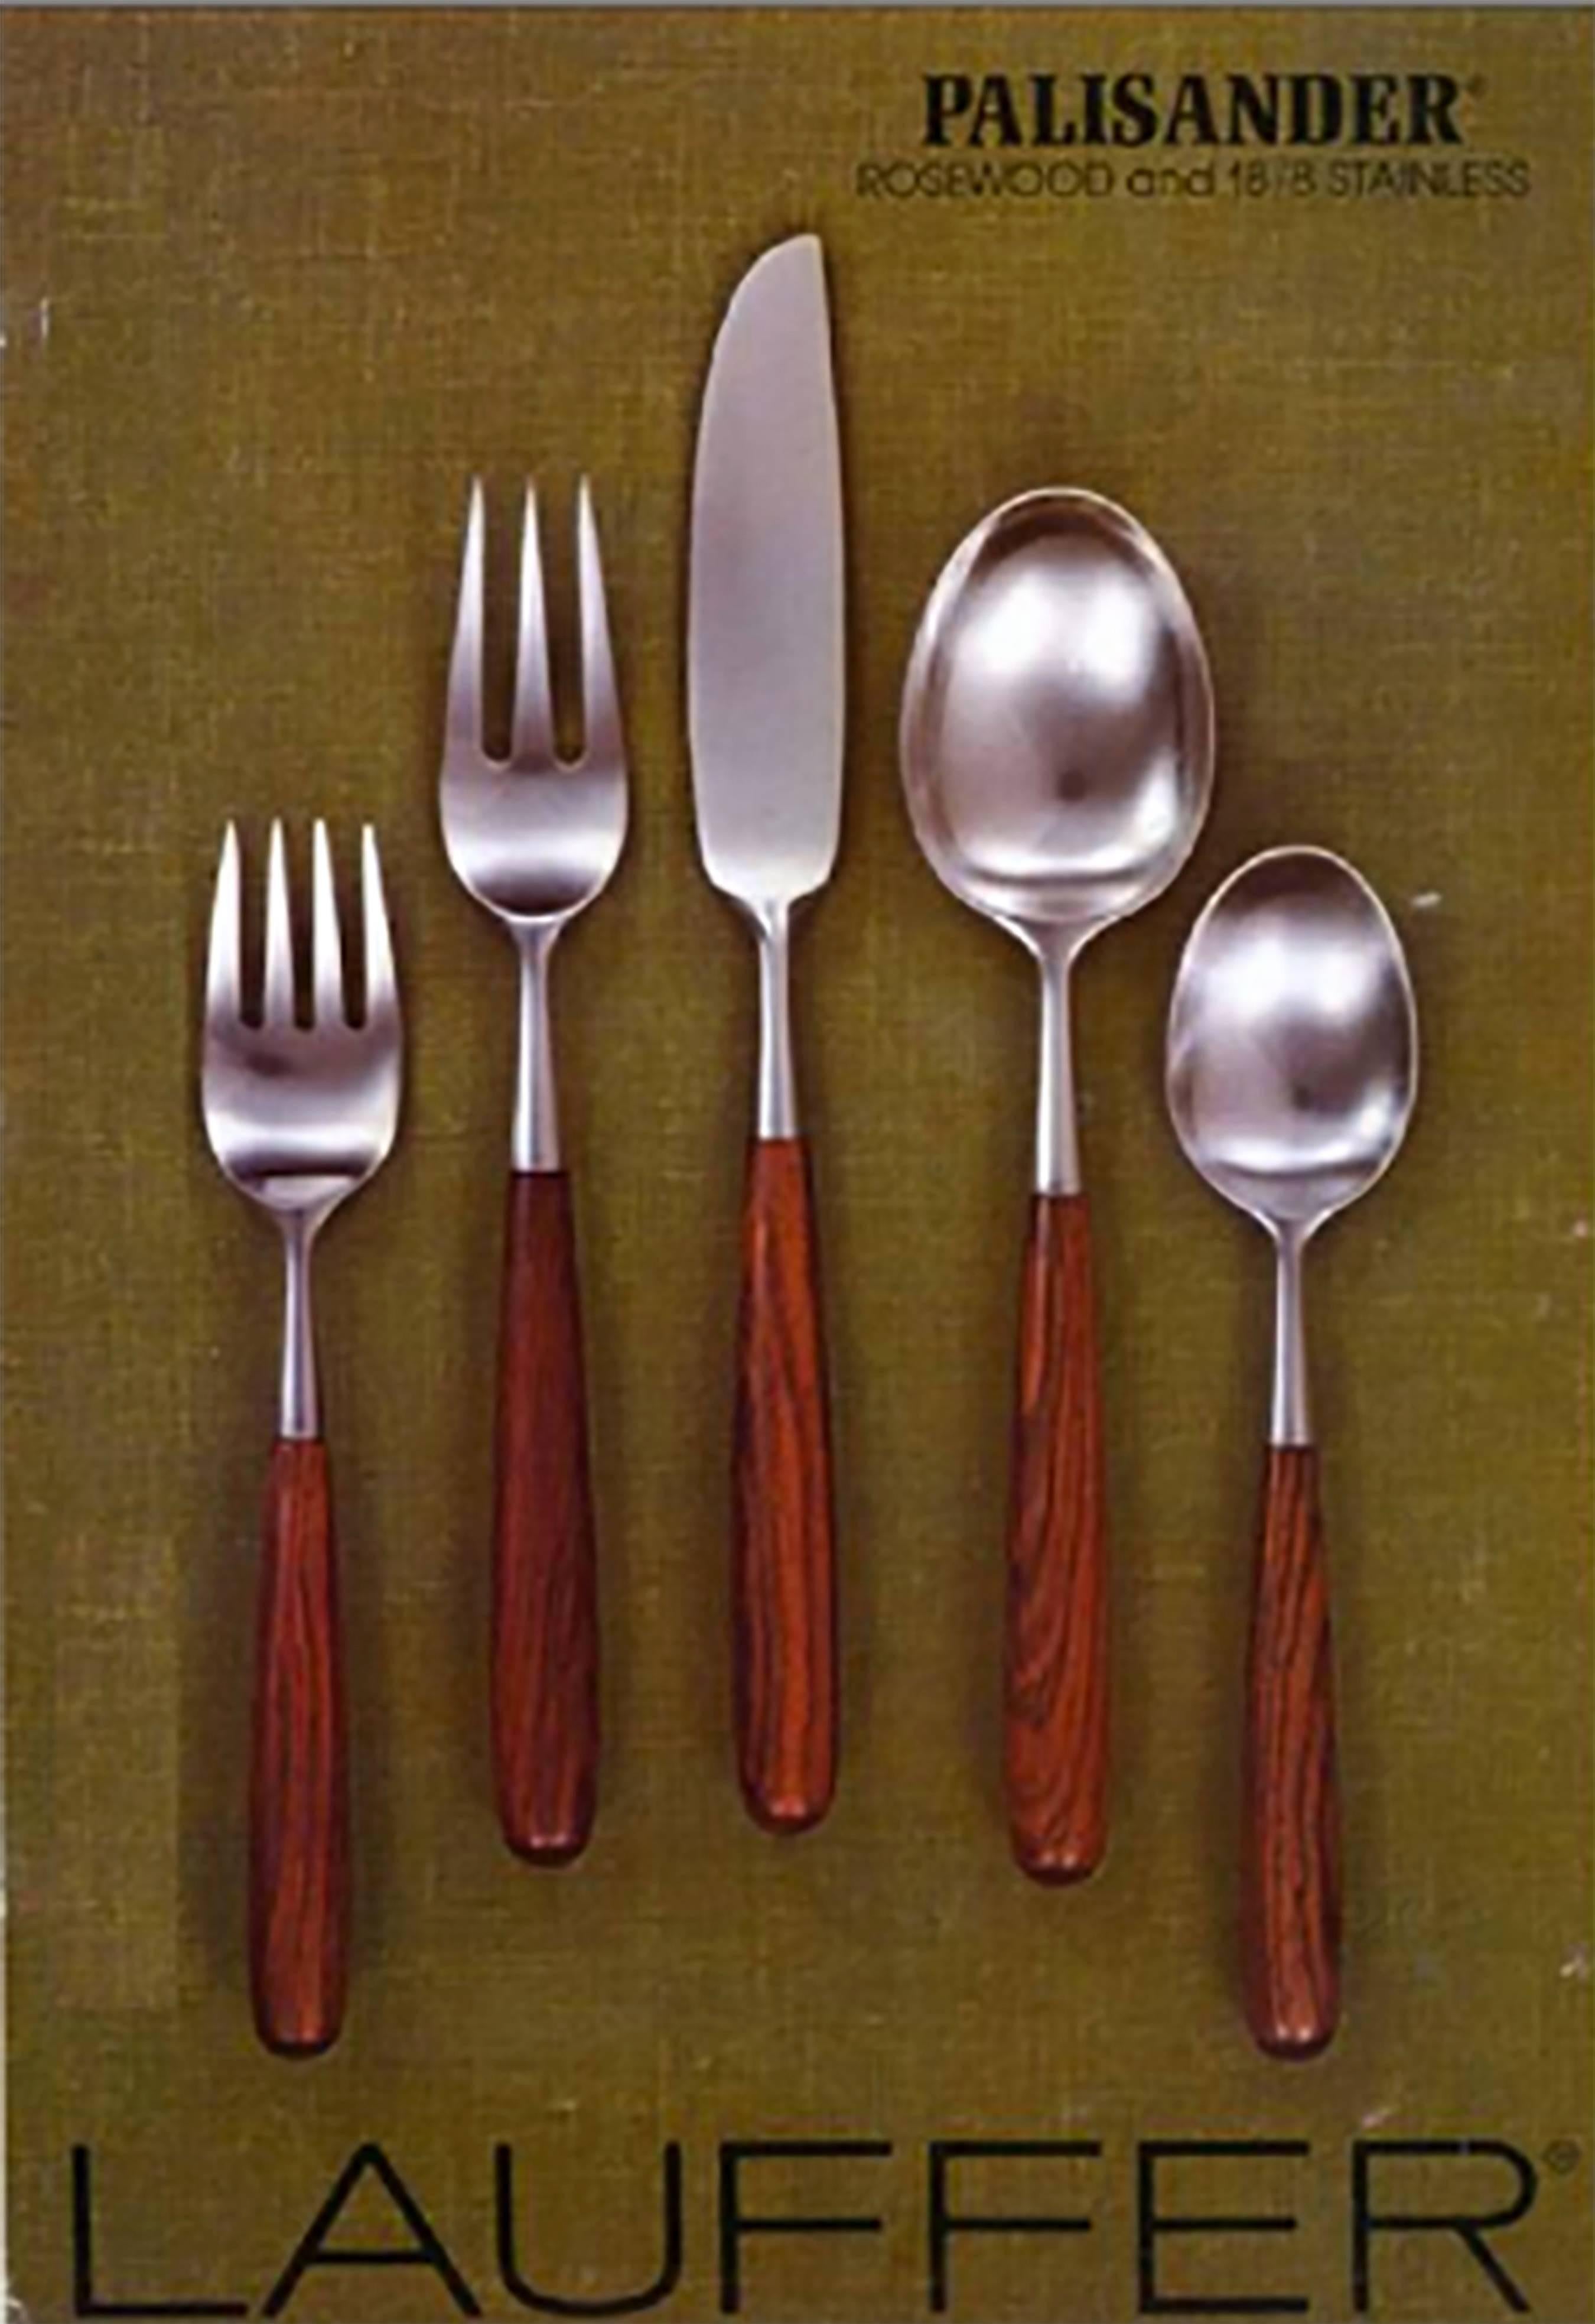 Norwegian Rare Vintage Lauffer Palisander Flatware from Norway in Rosewood by Don Wallance